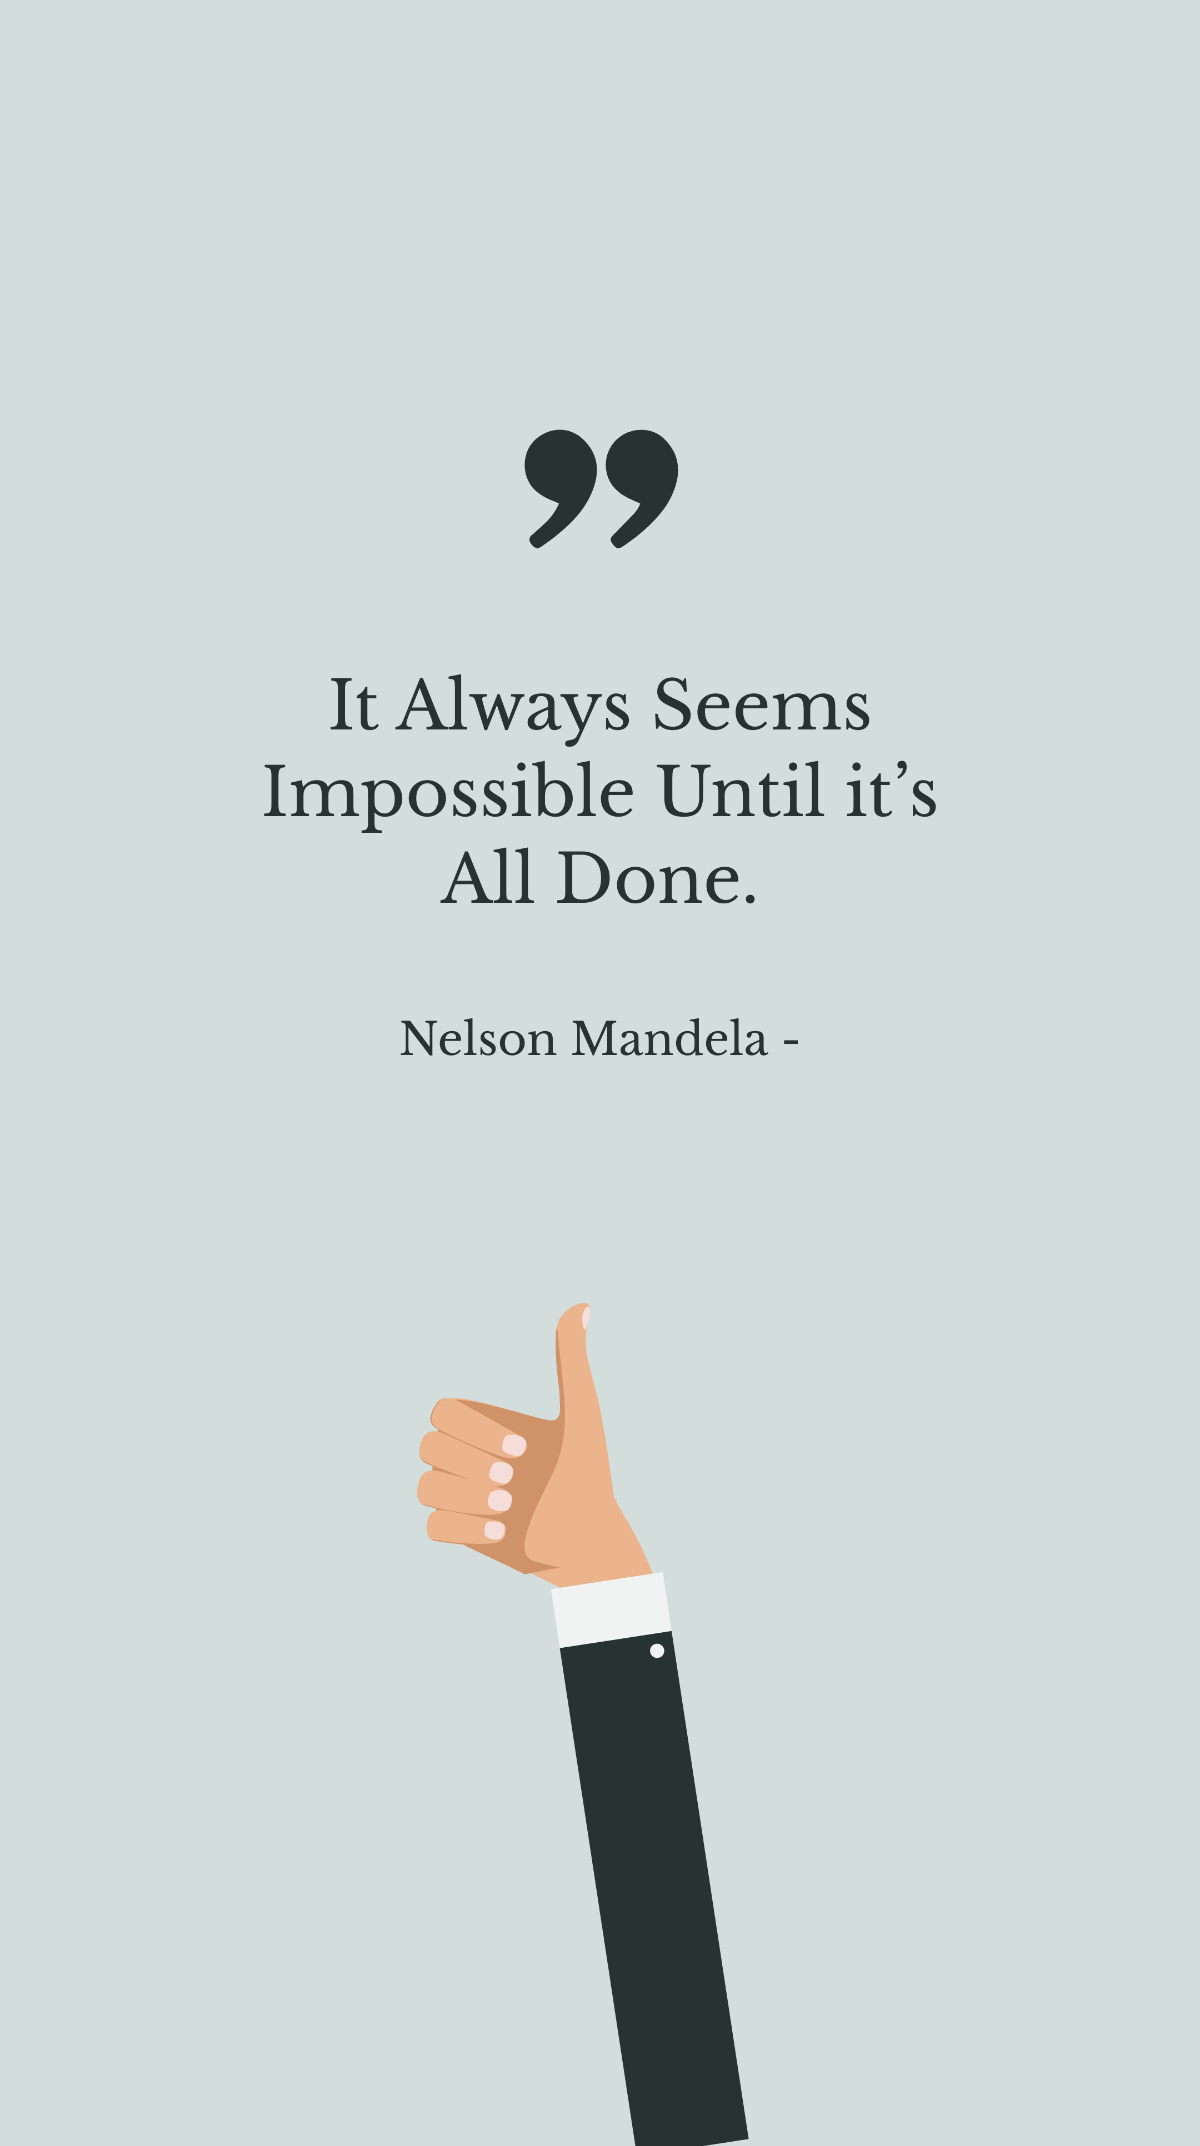 Nelson Mandela - It Always Seems Impossible Until it’s All Done. Template